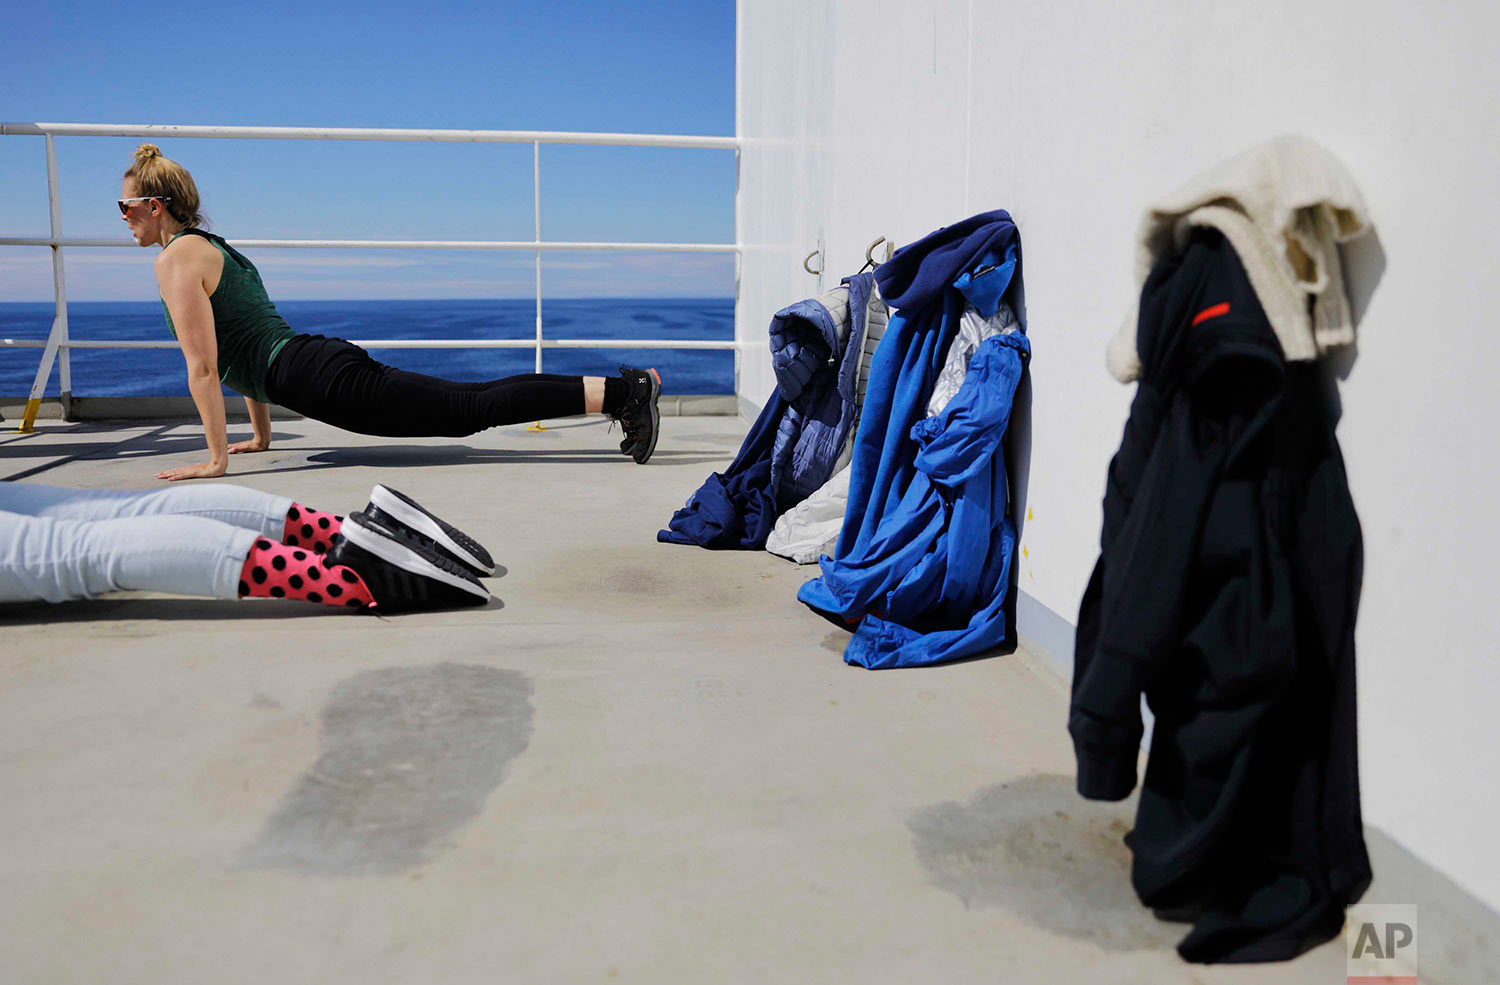  In this Thursday, July 13, 2017 photo, researchers Tiina Jaaskelainen, right, and Daria Gritsenko do yoga in the warm weather aboard the Finnish icebreaker MSV Nordica as it sails the Bering Sea to traverse the Northwest Passage through the Canadian